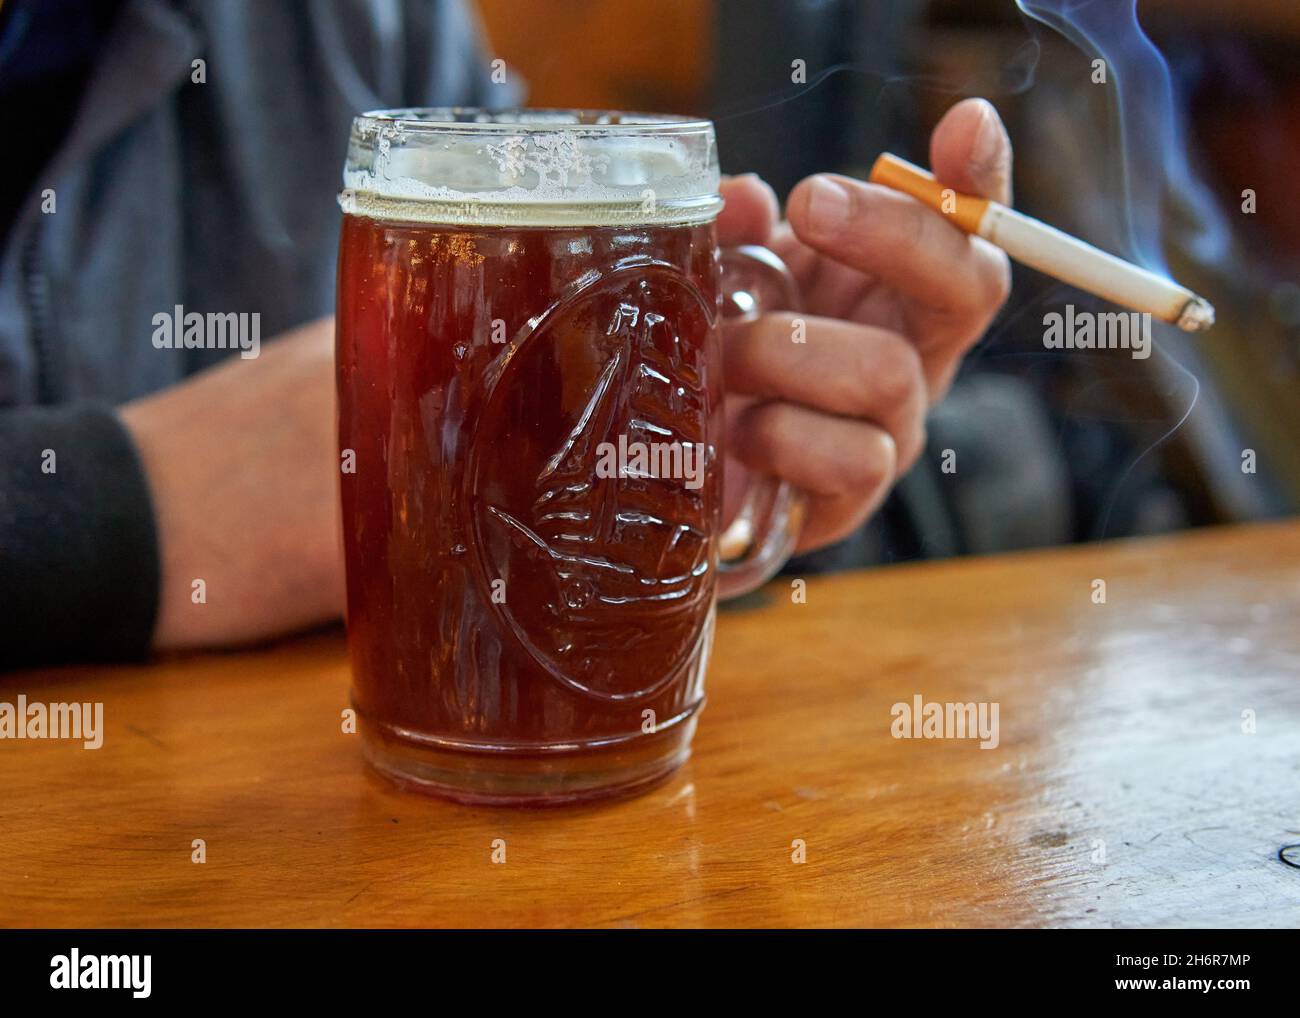 man's hand holding a mug of beer and a cigarette in a wooden table. Enjoying smoking and drinking alcohol. Horizontal. selective focus Stock Photo